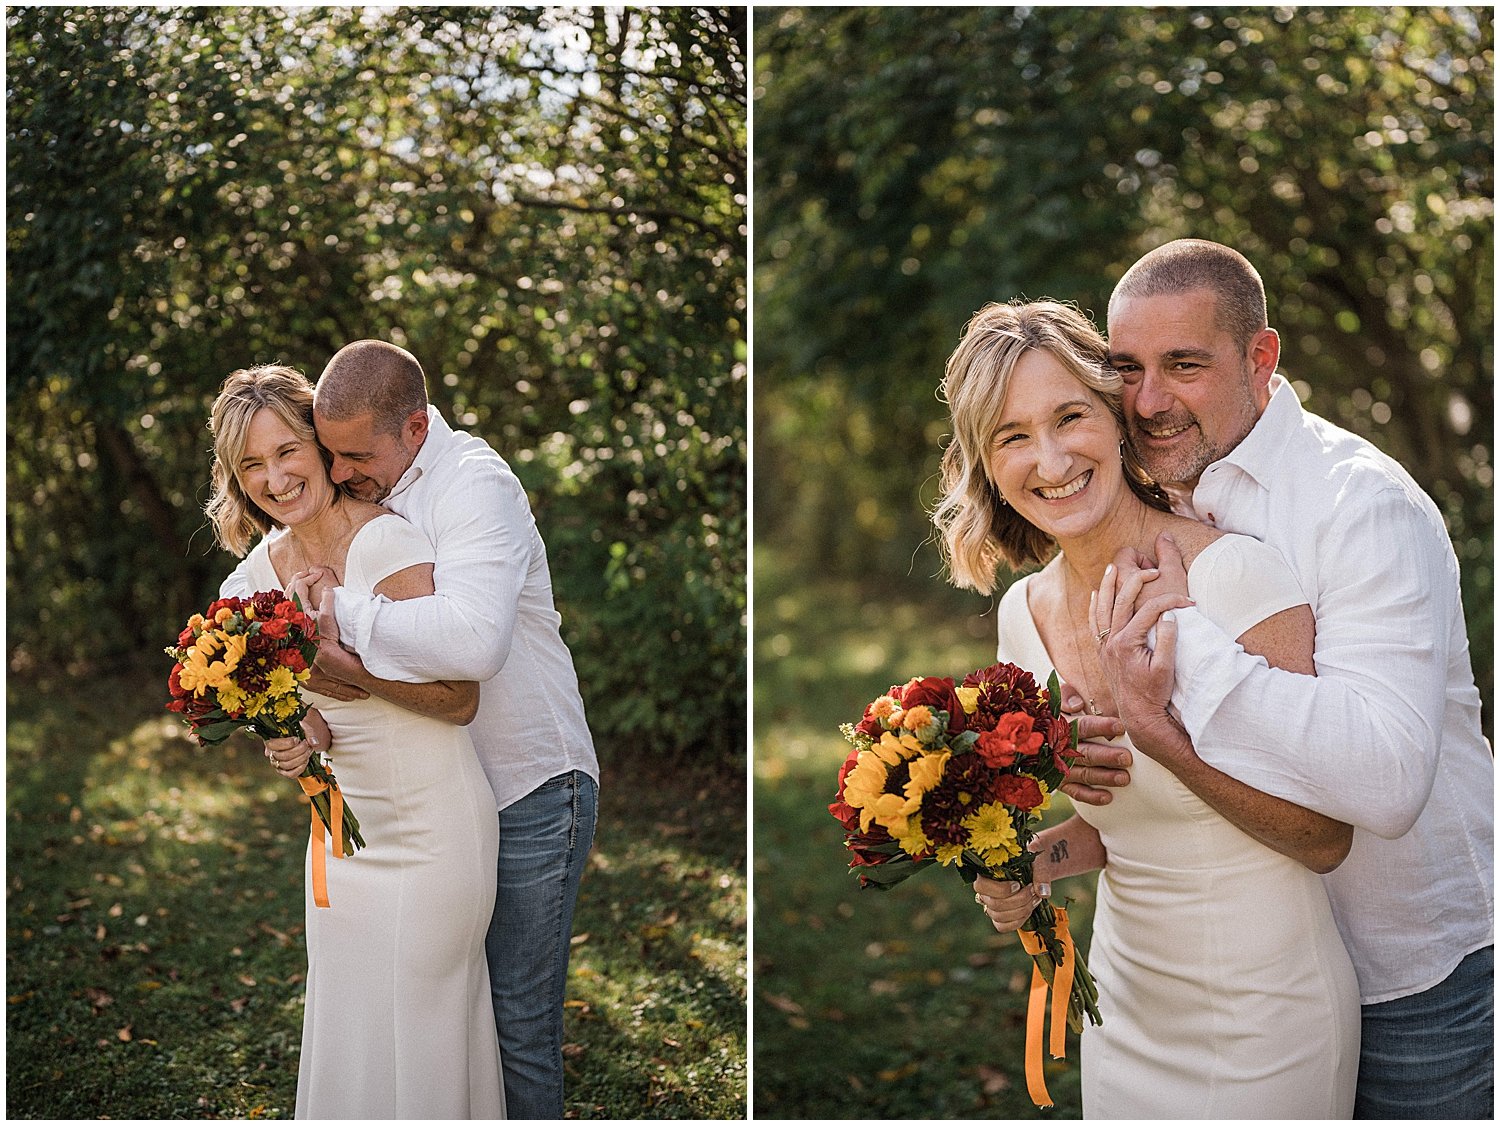 In-Home Elopement Ceremony &amp; Portraits | Yellowsprings, Ohio